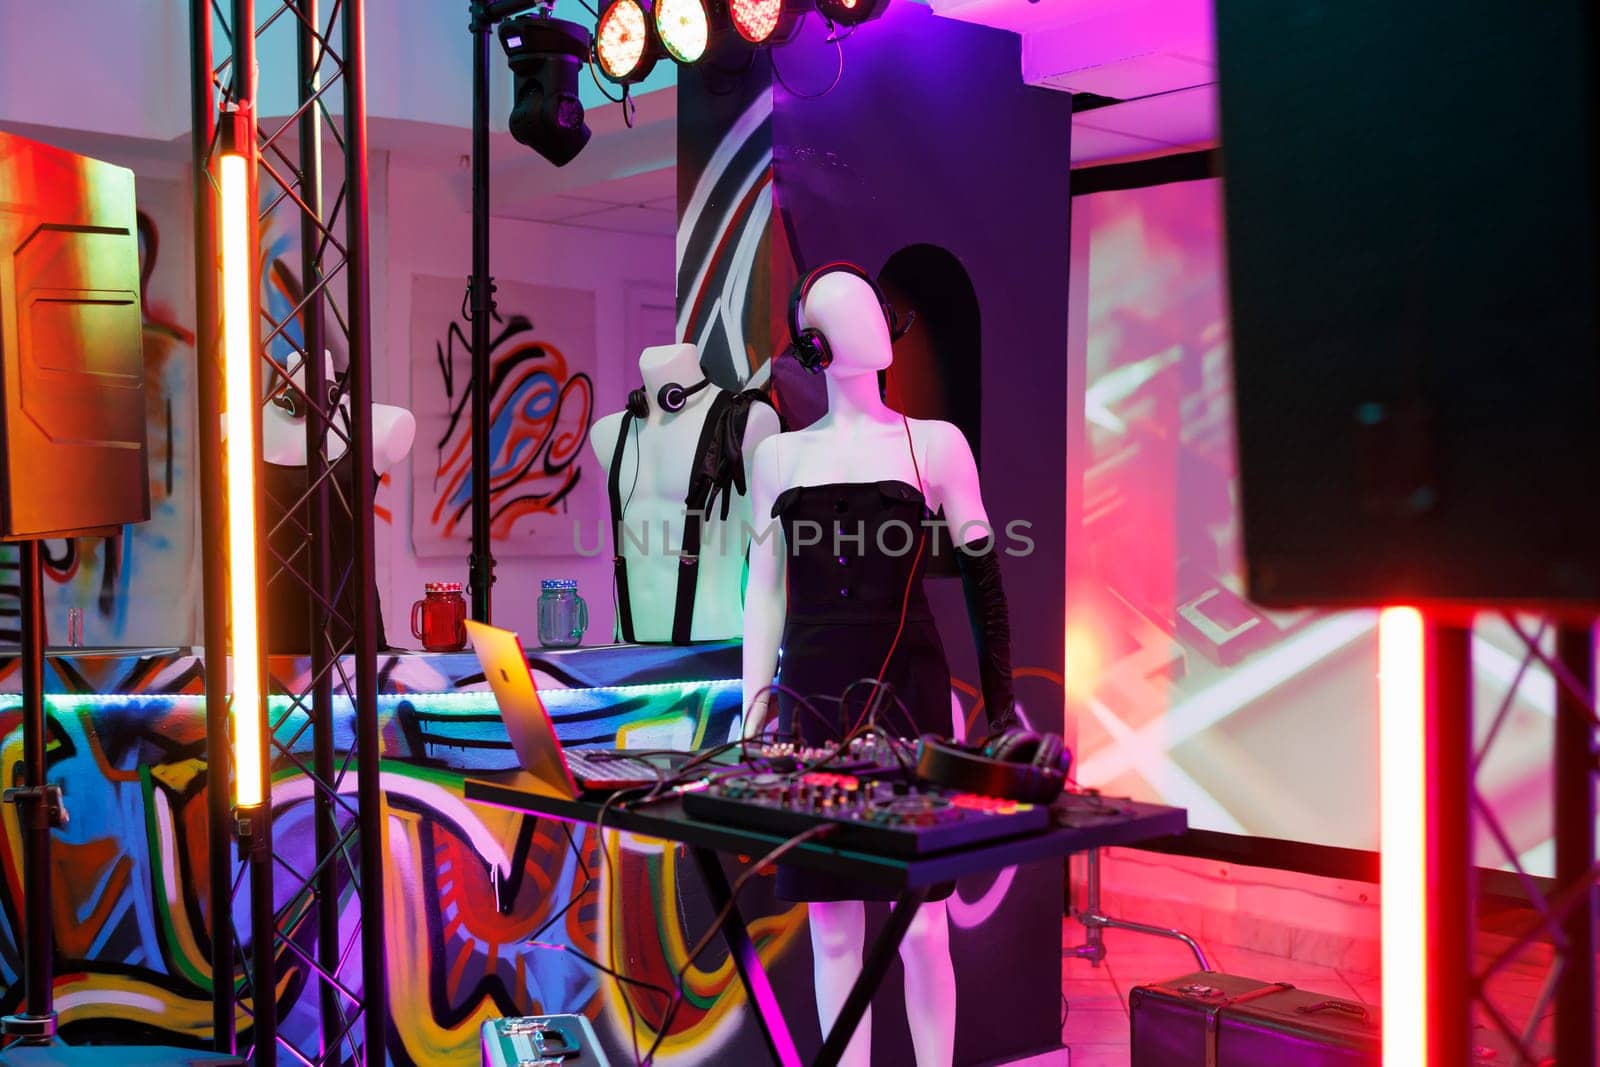 Musician sound mixer and mannequin in headset on stage in dark nightclub with spotlights. Dj controller equipment prepared for live performance and discotheque party in club